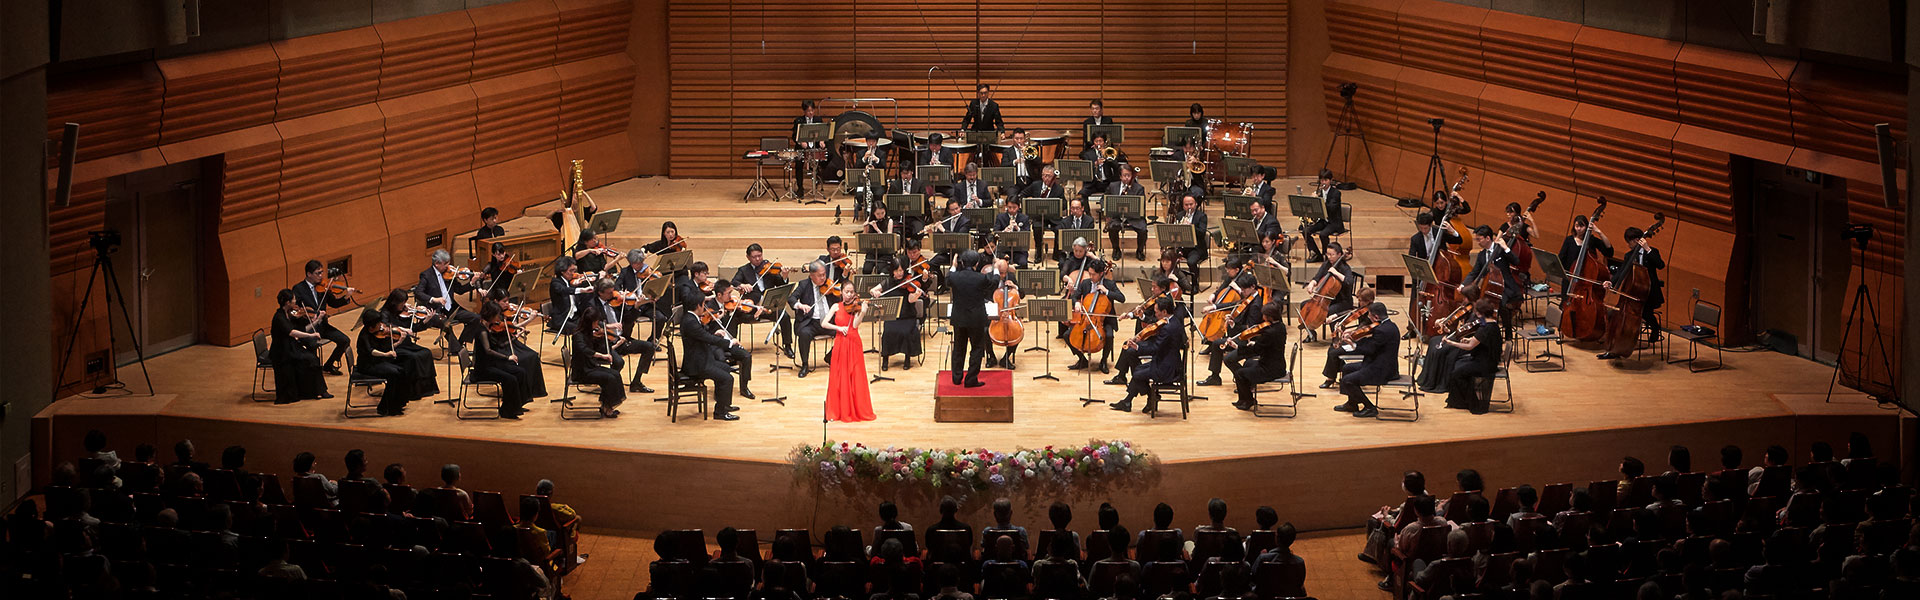 Tokyo Symphony Orchestra Suntory Hall Subscription Concert Series No.625 | Sendai International Music Competition Official Website